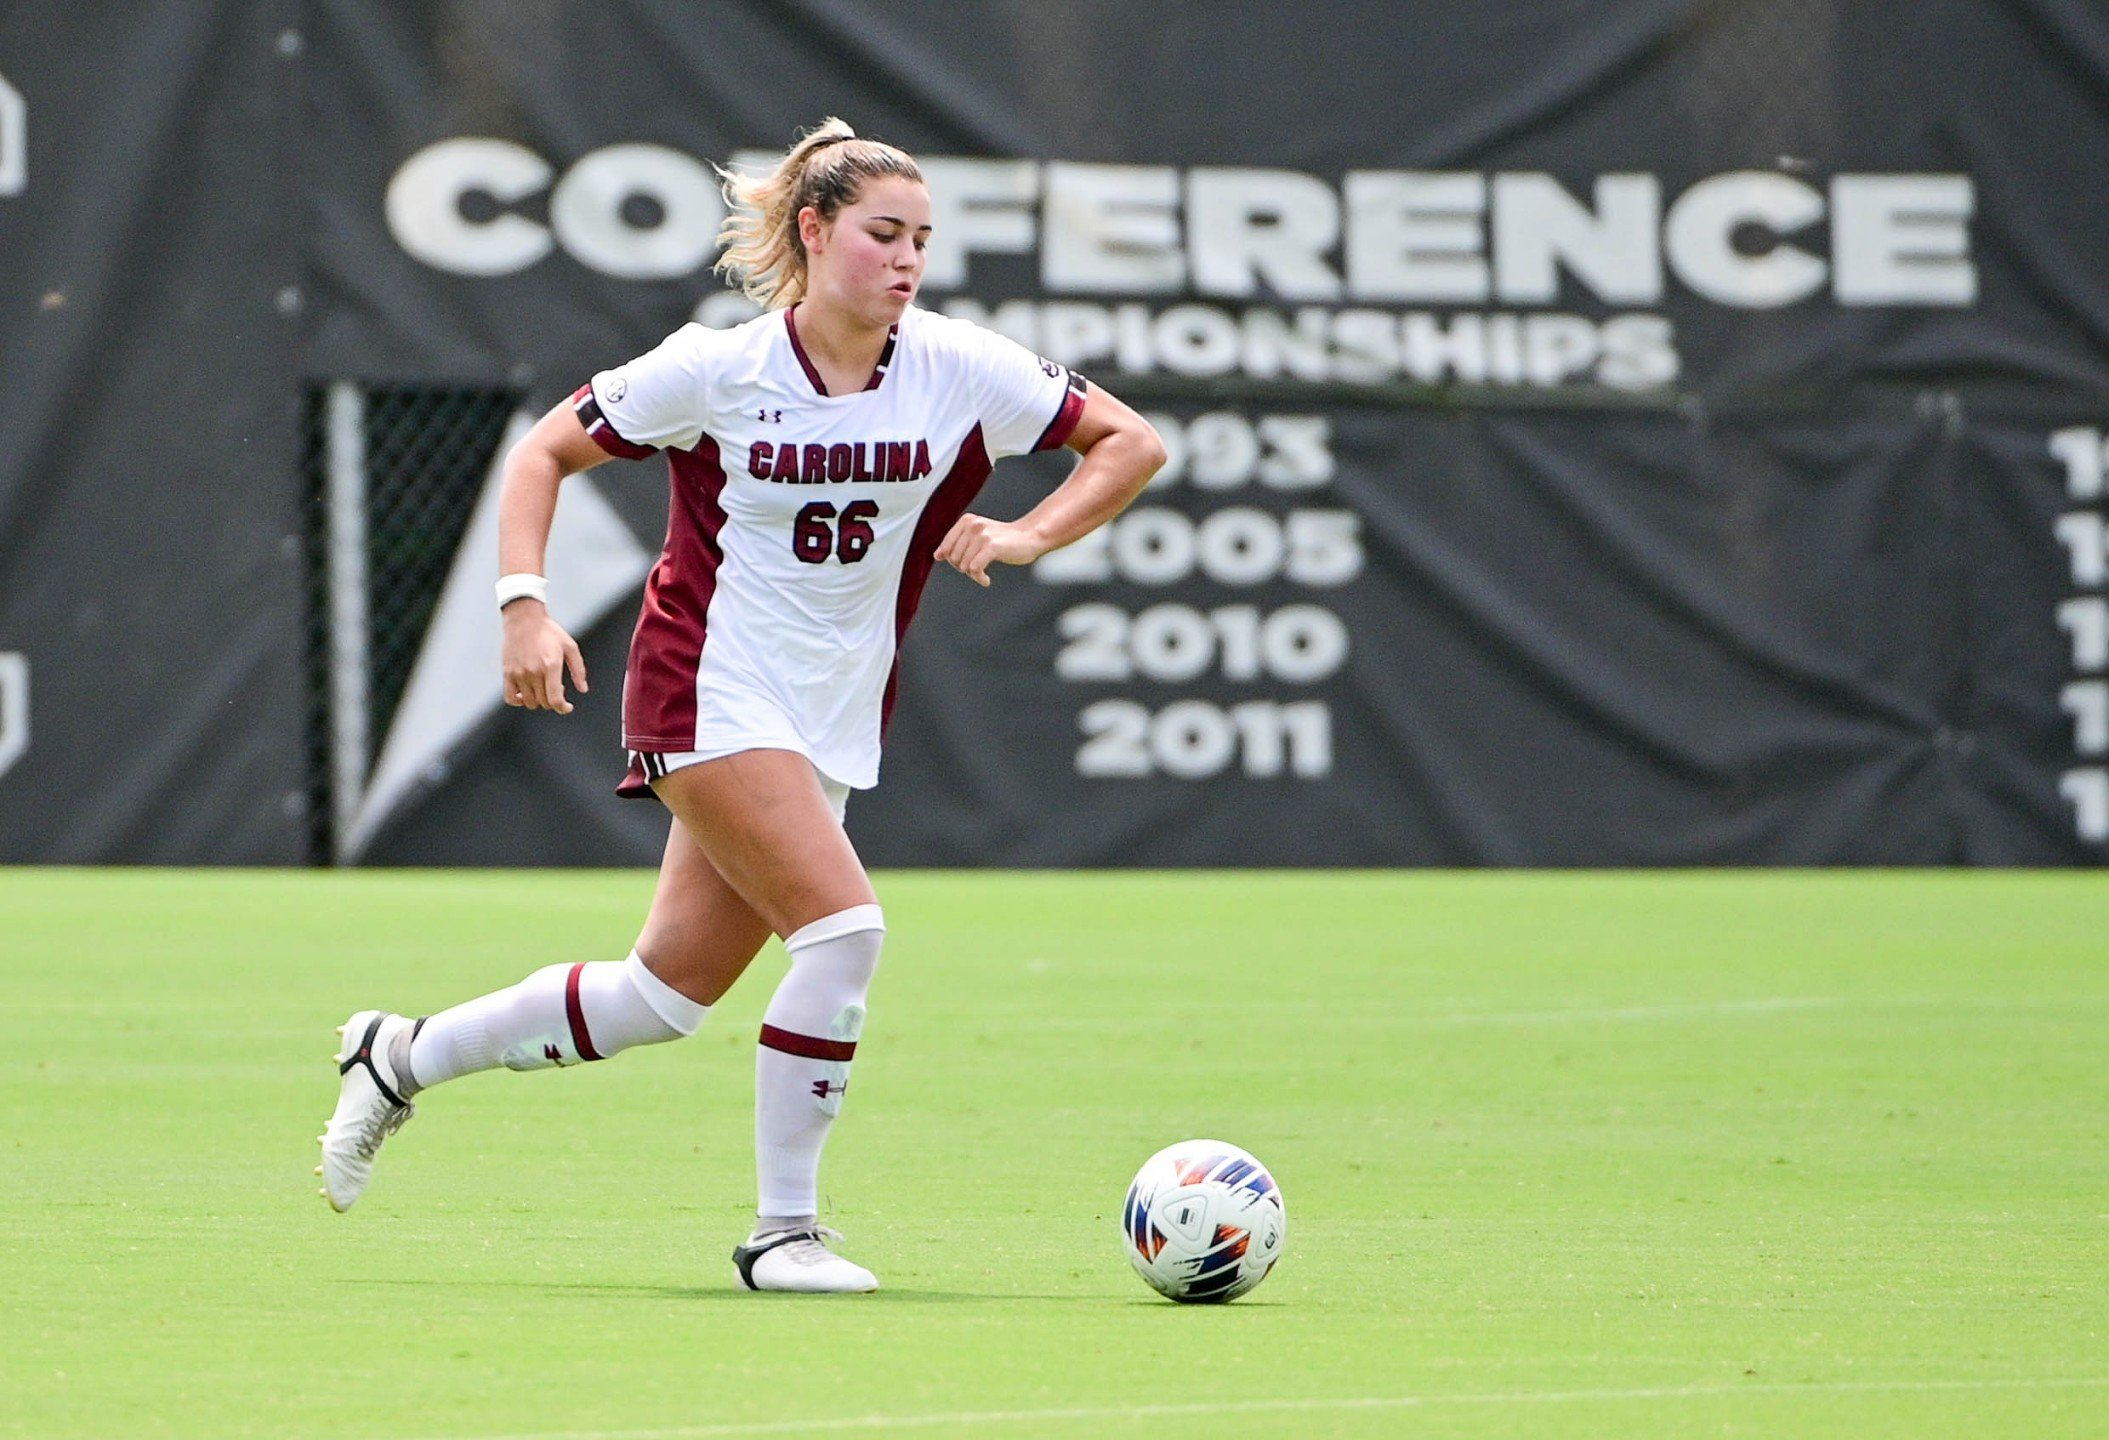 Gracie Falla Named to U.S U-20 Youth National Team Roster